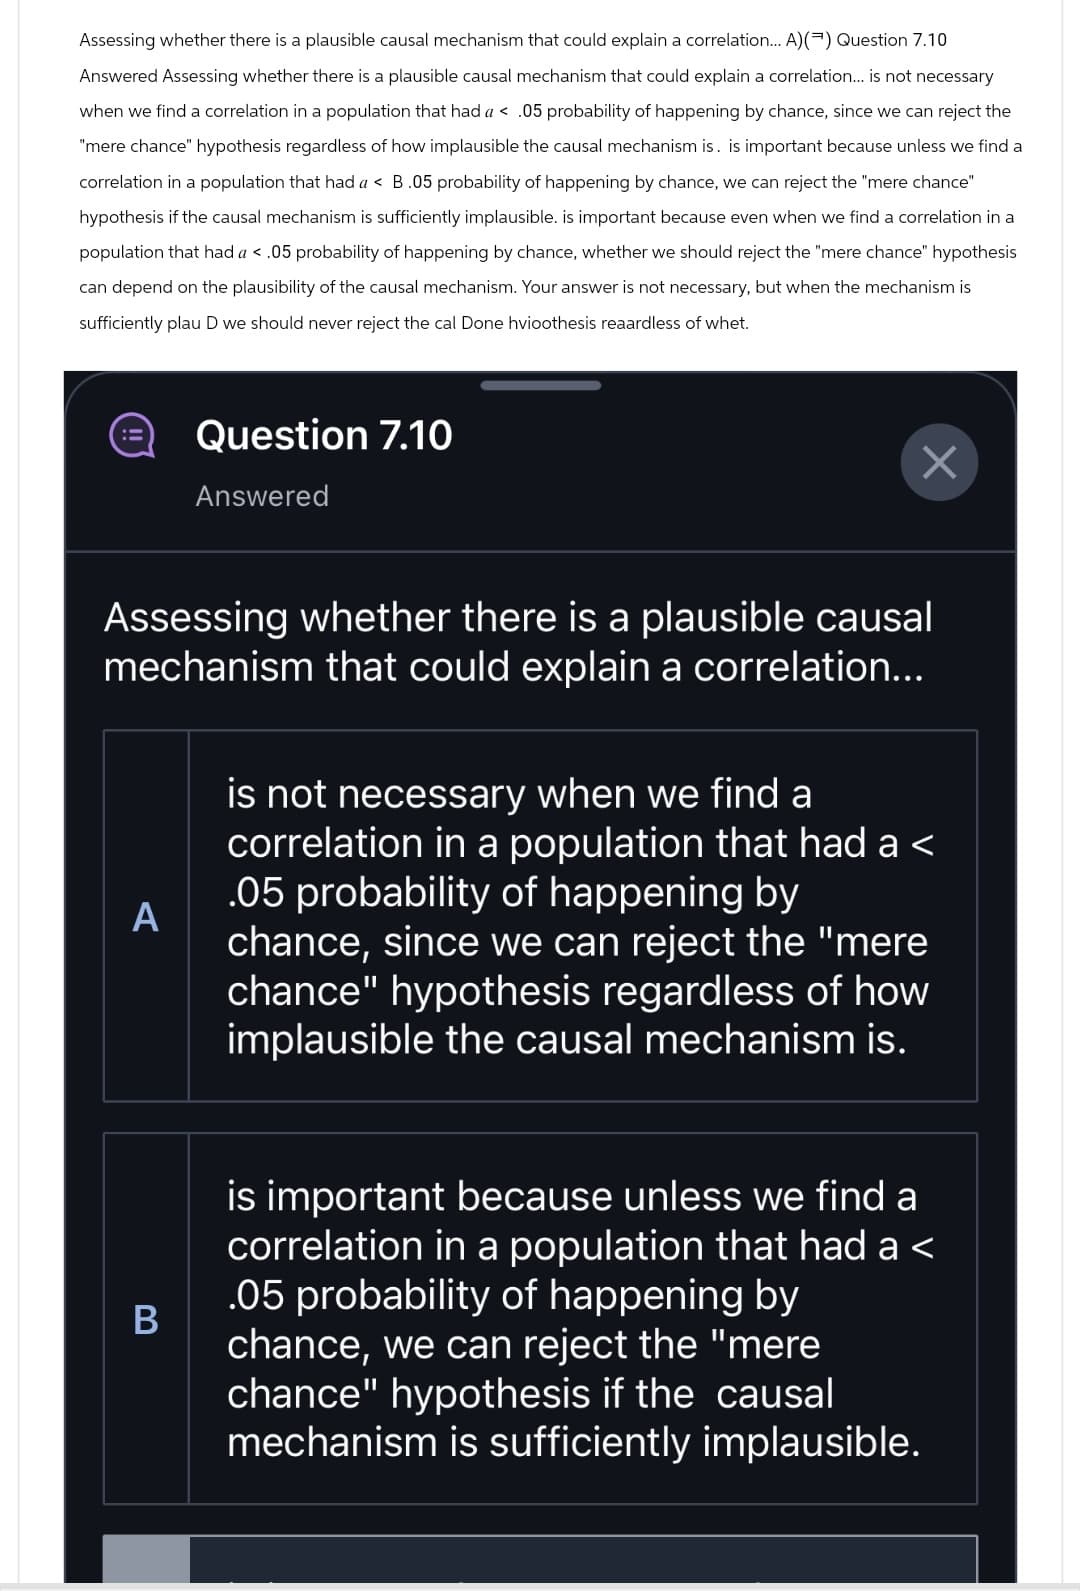 Assessing whether there is a plausible causal mechanism that could explain a correlation... A)() Question 7.10
Answered Assessing whether there is a plausible causal mechanism that could explain a correlation... is not necessary
when we find a correlation in a population that had a < .05 probability of happening by chance, since we can reject the
"mere chance" hypothesis regardless of how implausible the causal mechanism is. is important because unless we find a
correlation in a population that had a < B.05 probability of happening by chance, we can reject the "mere chance"
hypothesis if the causal mechanism is sufficiently implausible. is important because even when we find a correlation in a
population that had a < .05 probability of happening by chance, whether we should reject the "mere chance" hypothesis
can depend on the plausibility of the causal mechanism. Your answer is not necessary, but when the mechanism is
sufficiently plau D we should never reject the cal Done hvioothesis reaardless of whet.
Question 7.10
Answered
Assessing whether there is a plausible causal
mechanism that could explain a correlation...
A
is not necessary when we find a
correlation in a population that had a <
.05 probability of happening by
chance, since we can reject the "mere
chance" hypothesis regardless of how
implausible the causal mechanism is.
B
is important because unless we find a
correlation in a population that had a <
.05 probability of happening by
chance, we can reject the "mere
chance" hypothesis if the causal
mechanism is sufficiently implausible.
☑